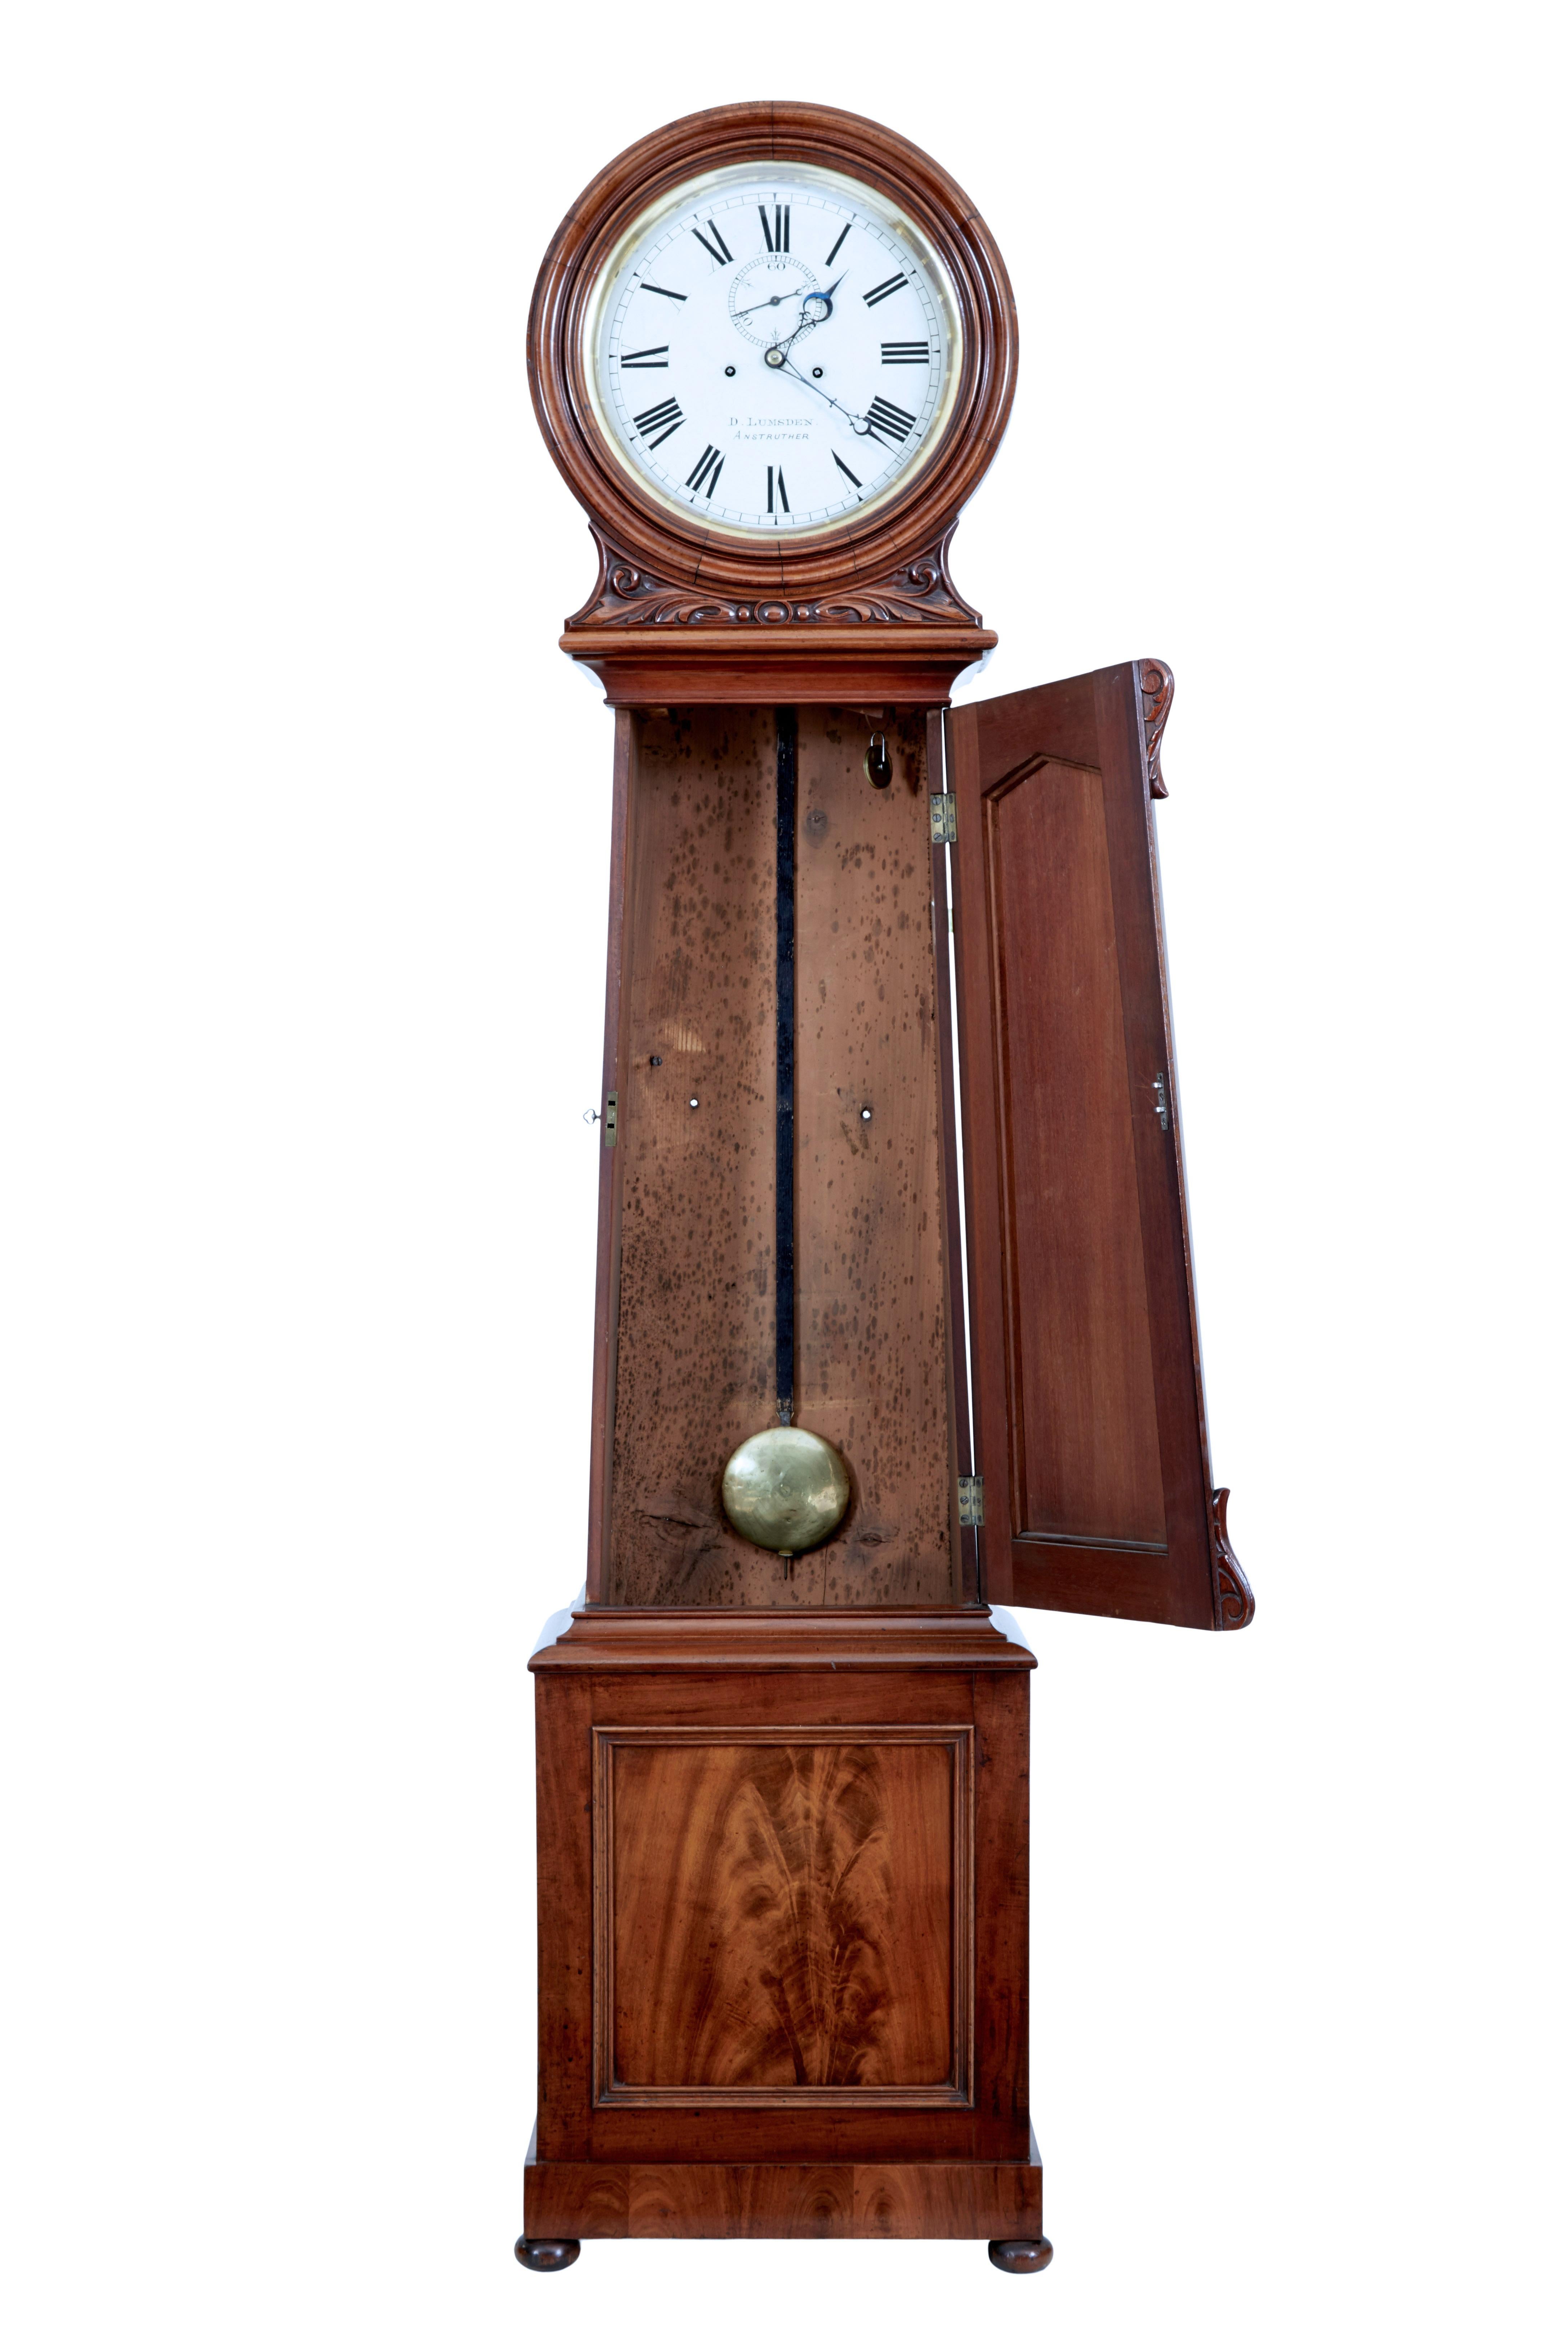 Scottish 19th century carved mahogany long case clock by Lumsden circa 1874.

Fine quality long case clock baring the makers name on the face, D Lumsden, and marked Anstruther which is a town in Scotland, where he was based.

White enamel dial